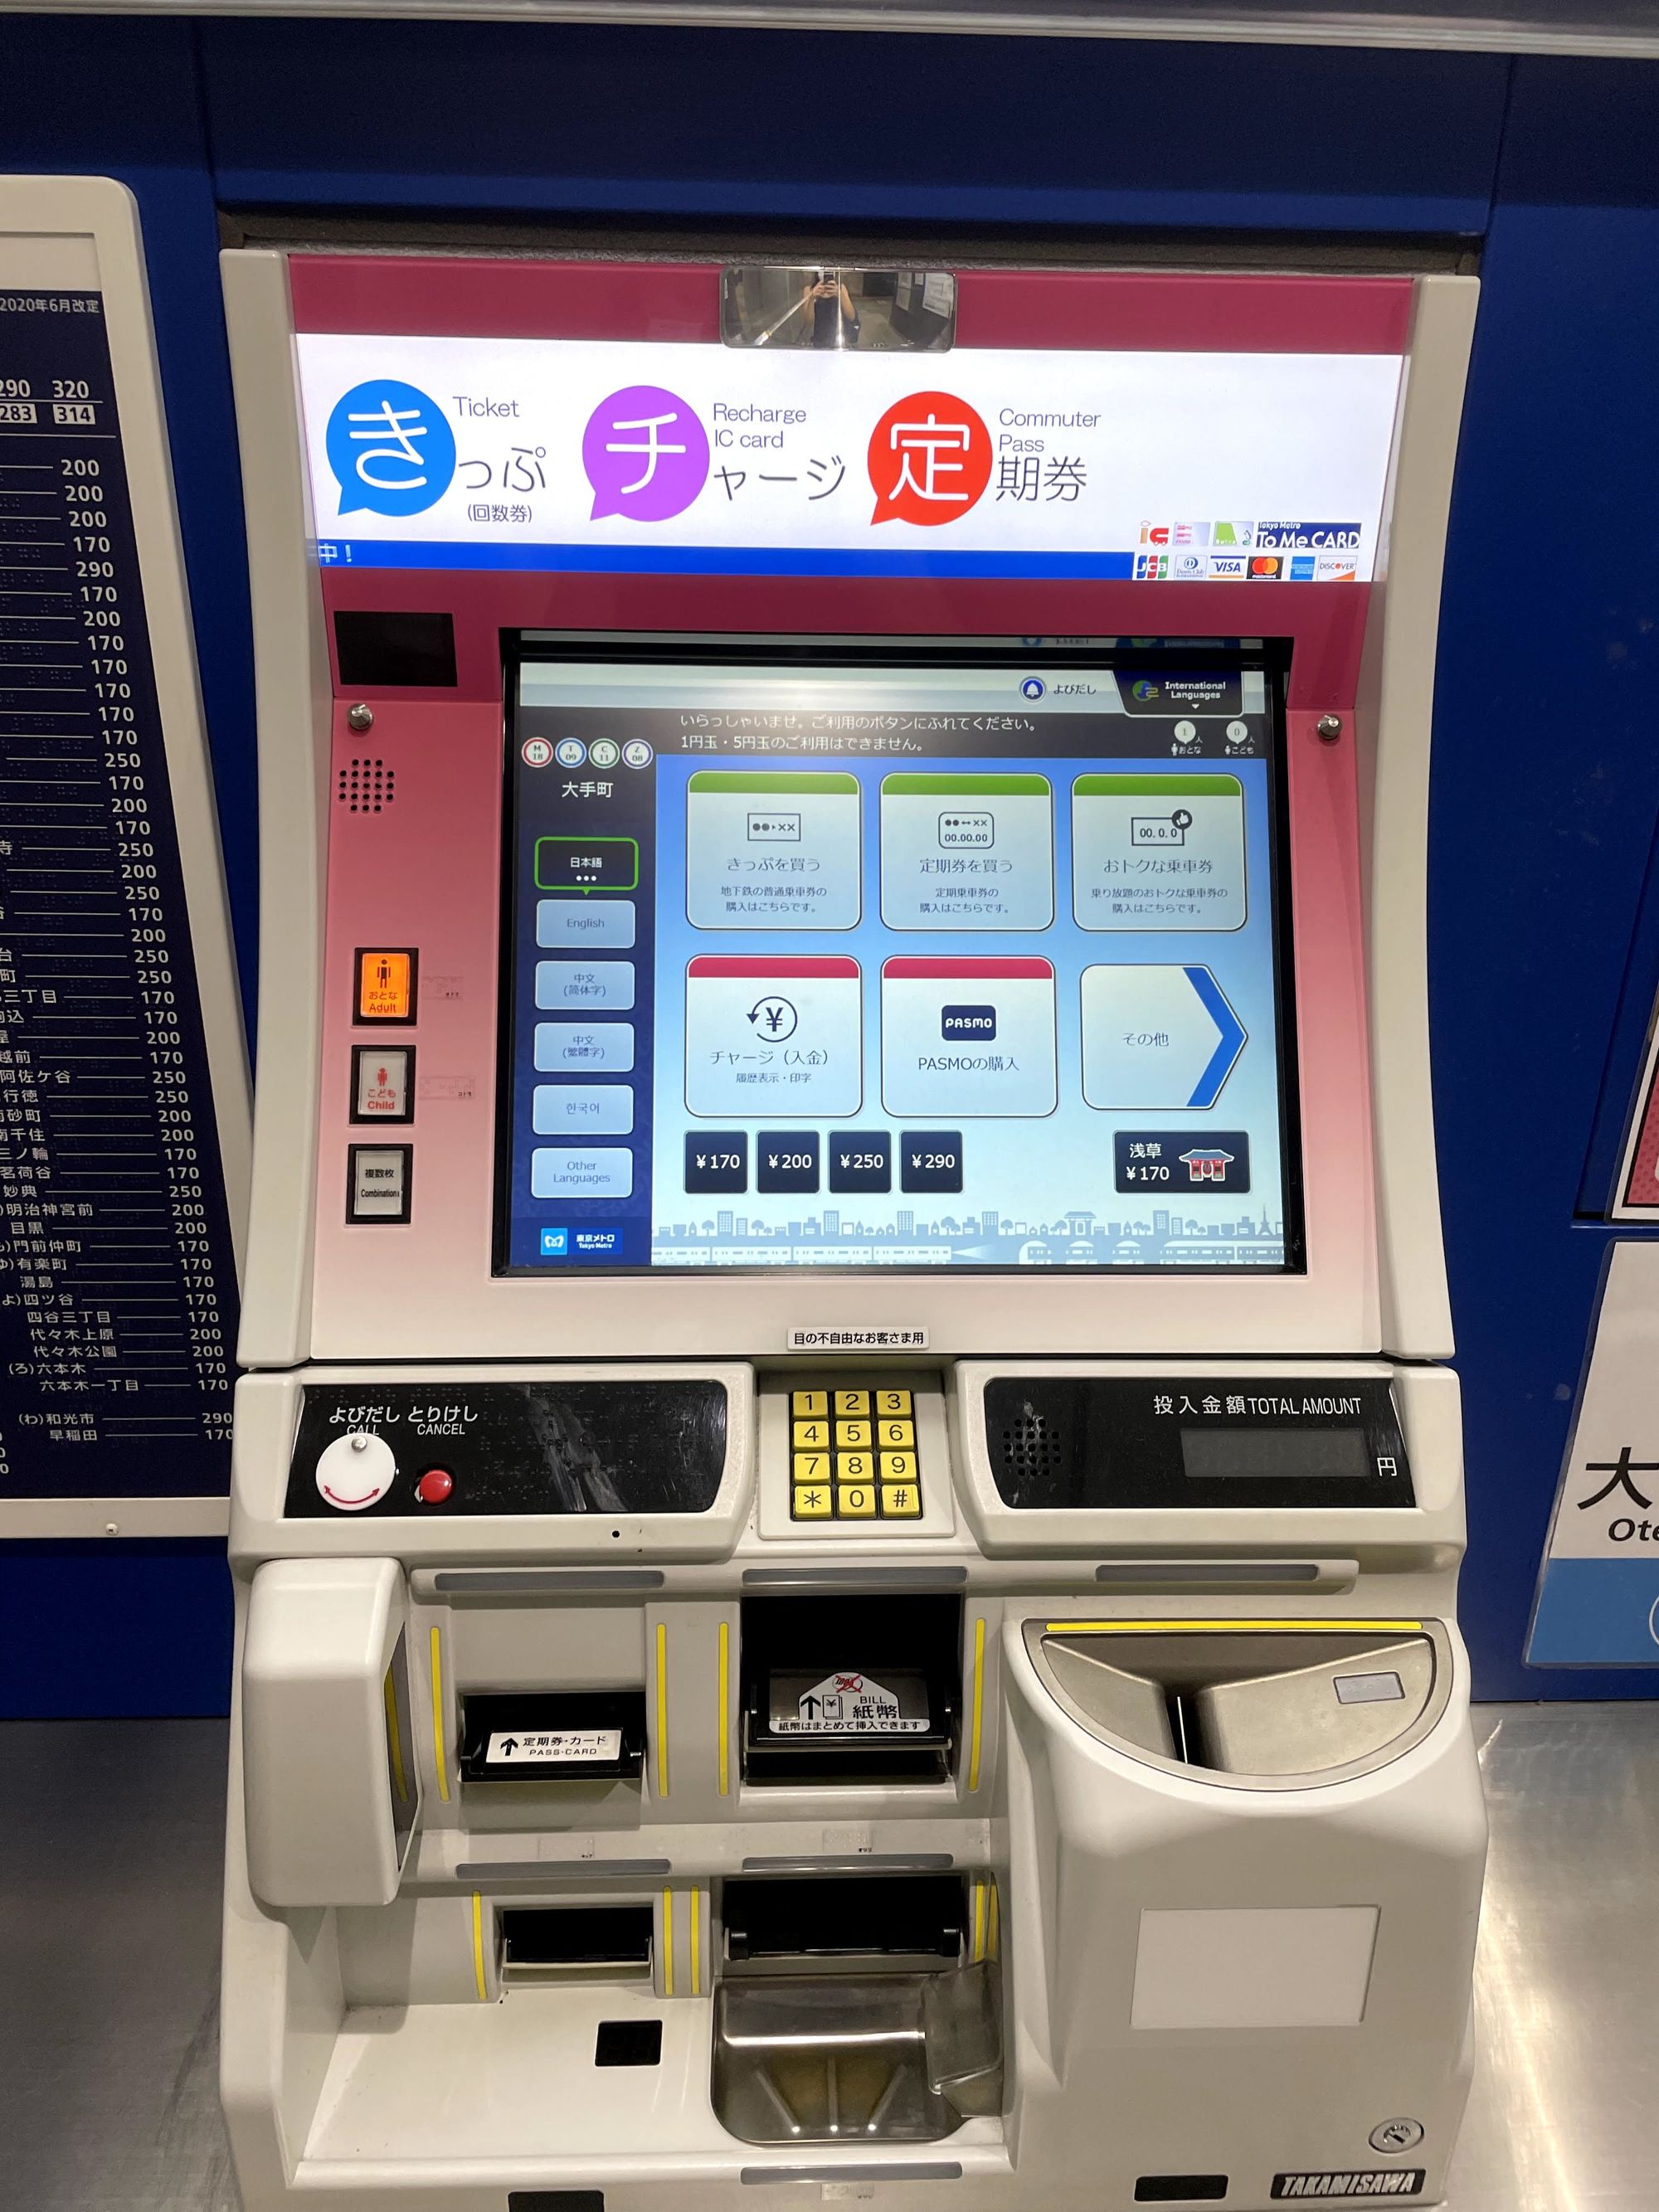 Japanese train ticket machine in tokyo with buttons